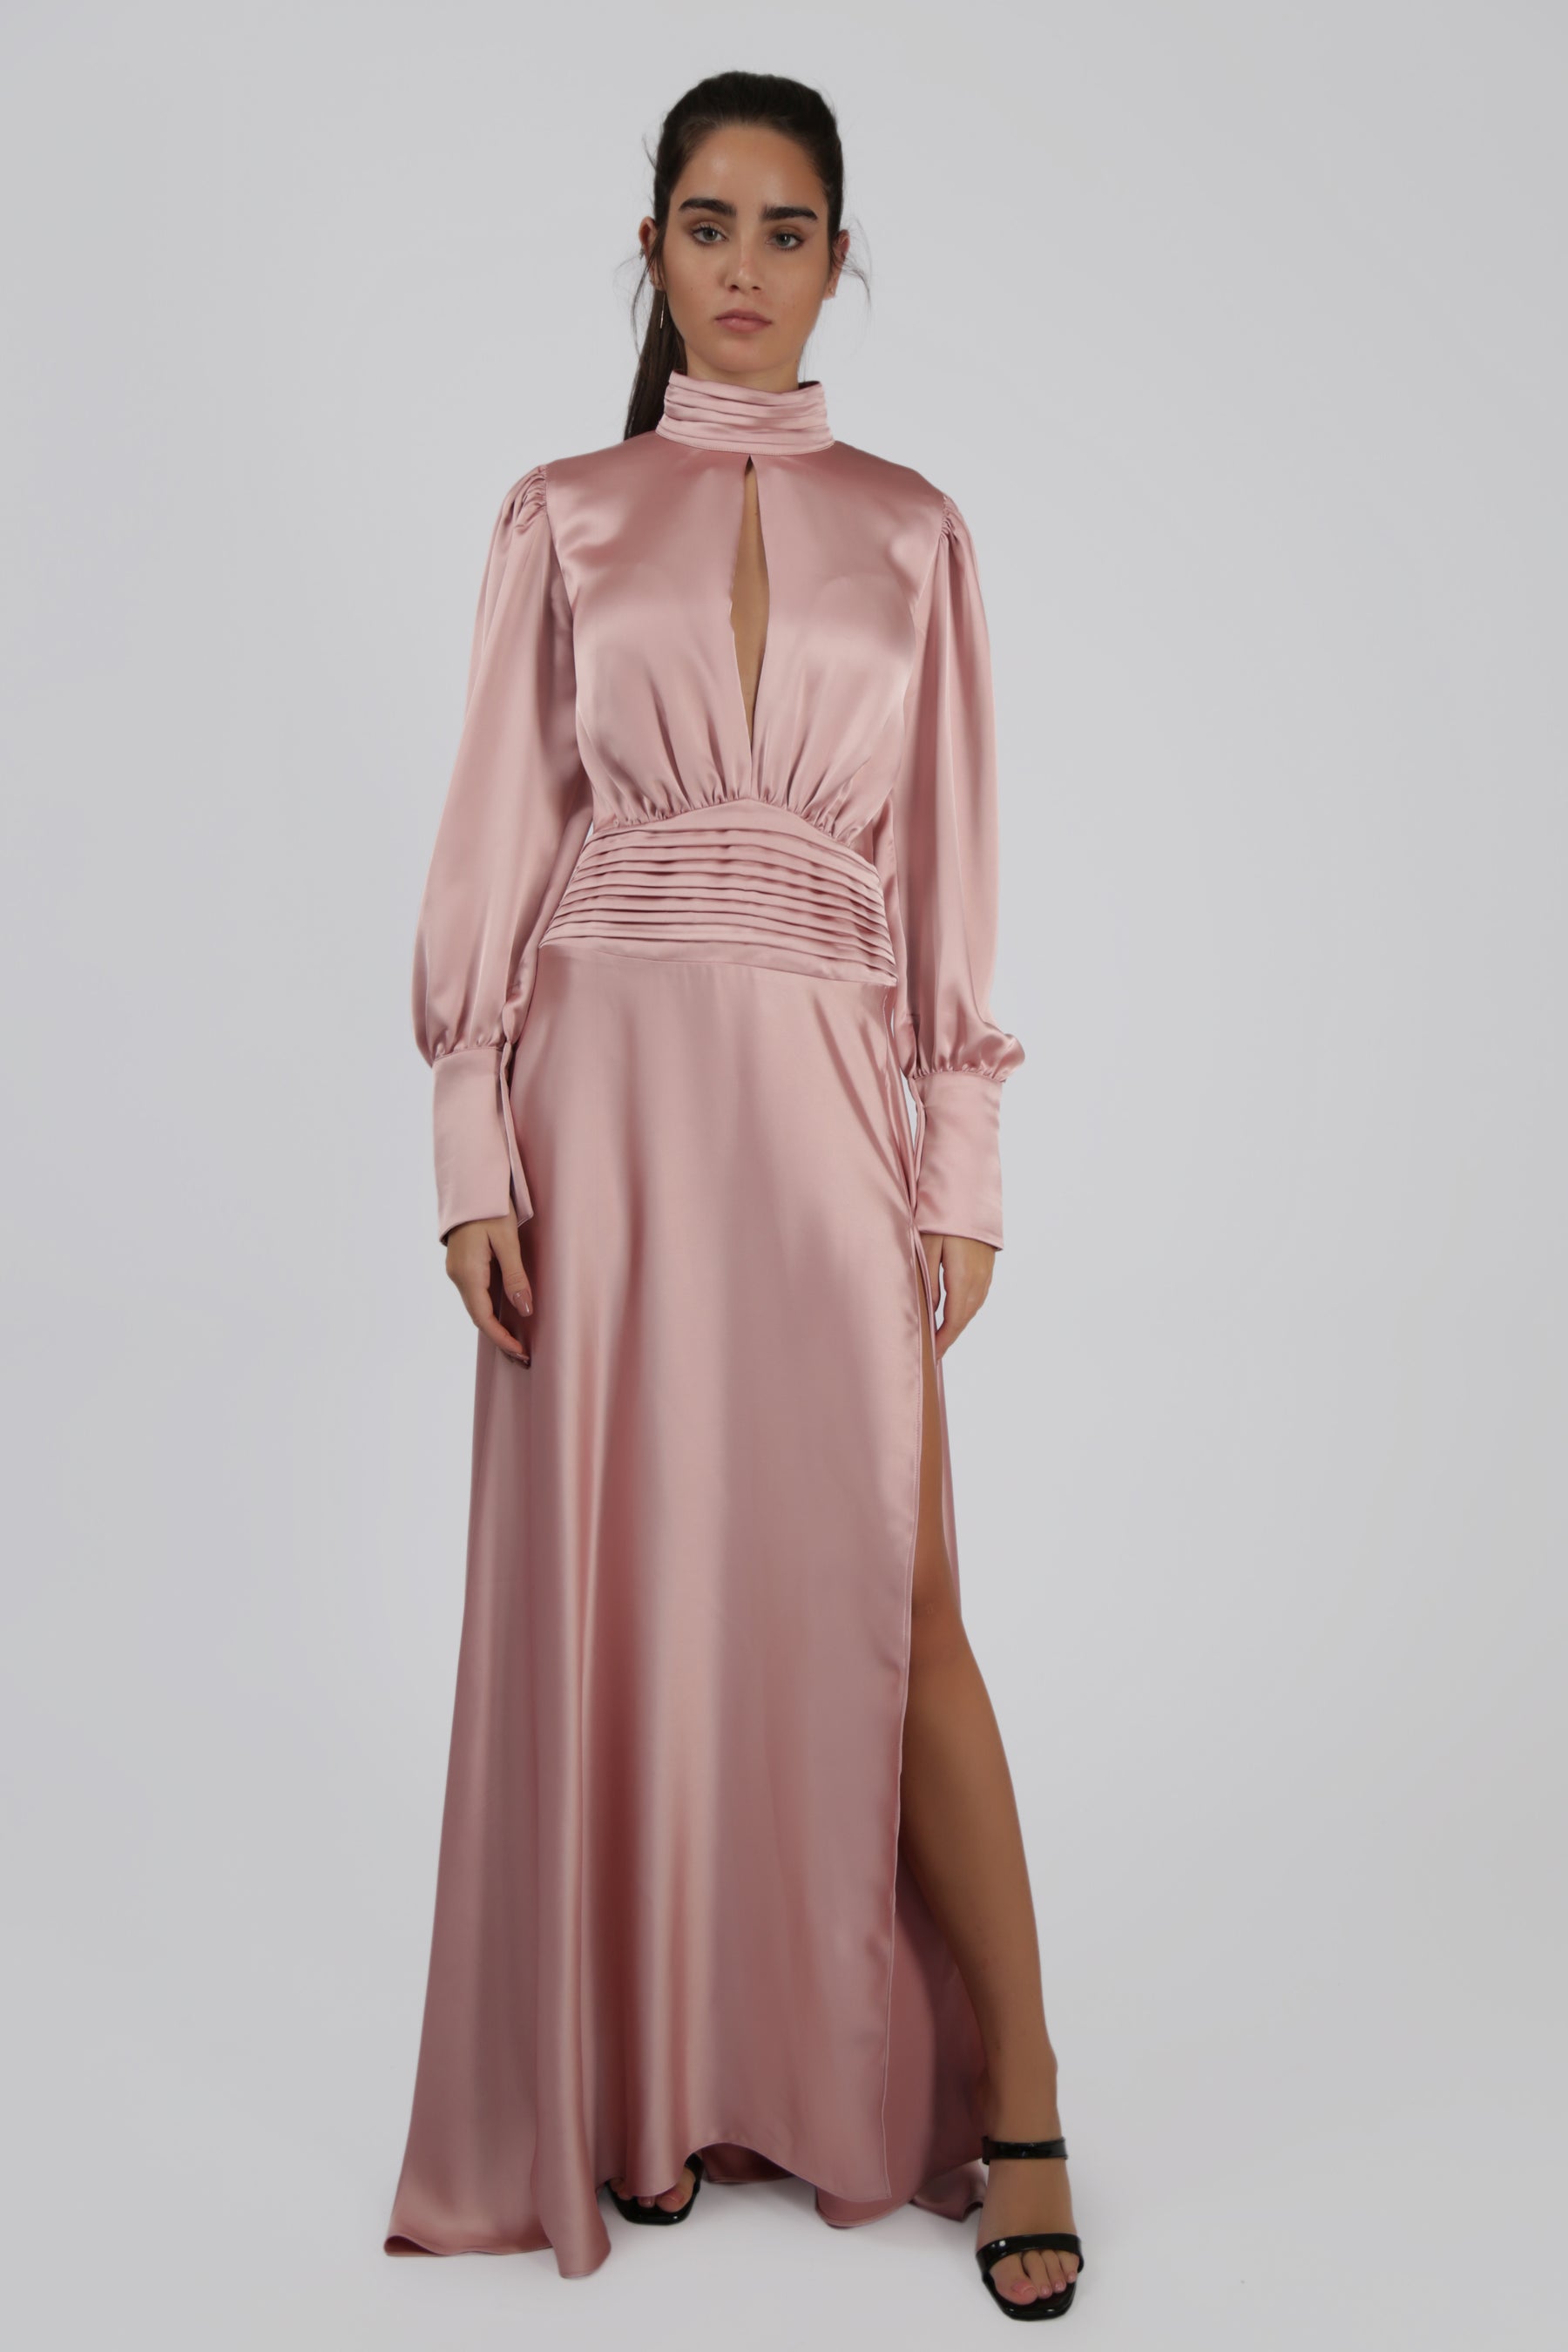 Satin Maxi Dress with Front Slit